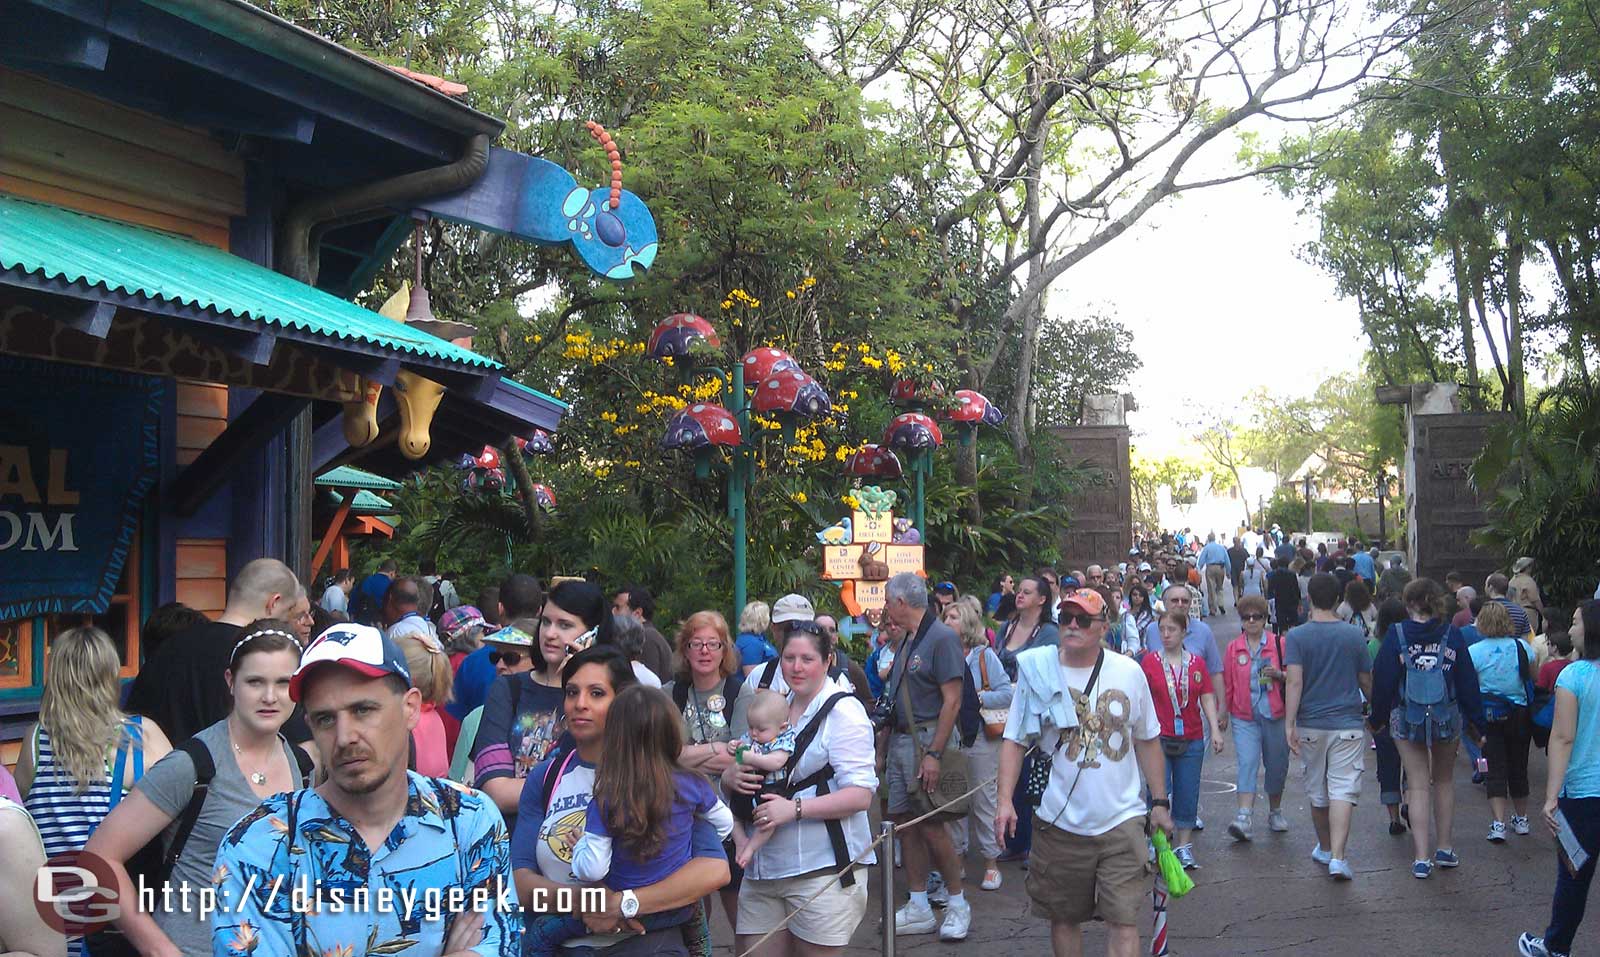 The merchandise line stretches from Creature Comforts back into Harambe and wraps around out there DAK15